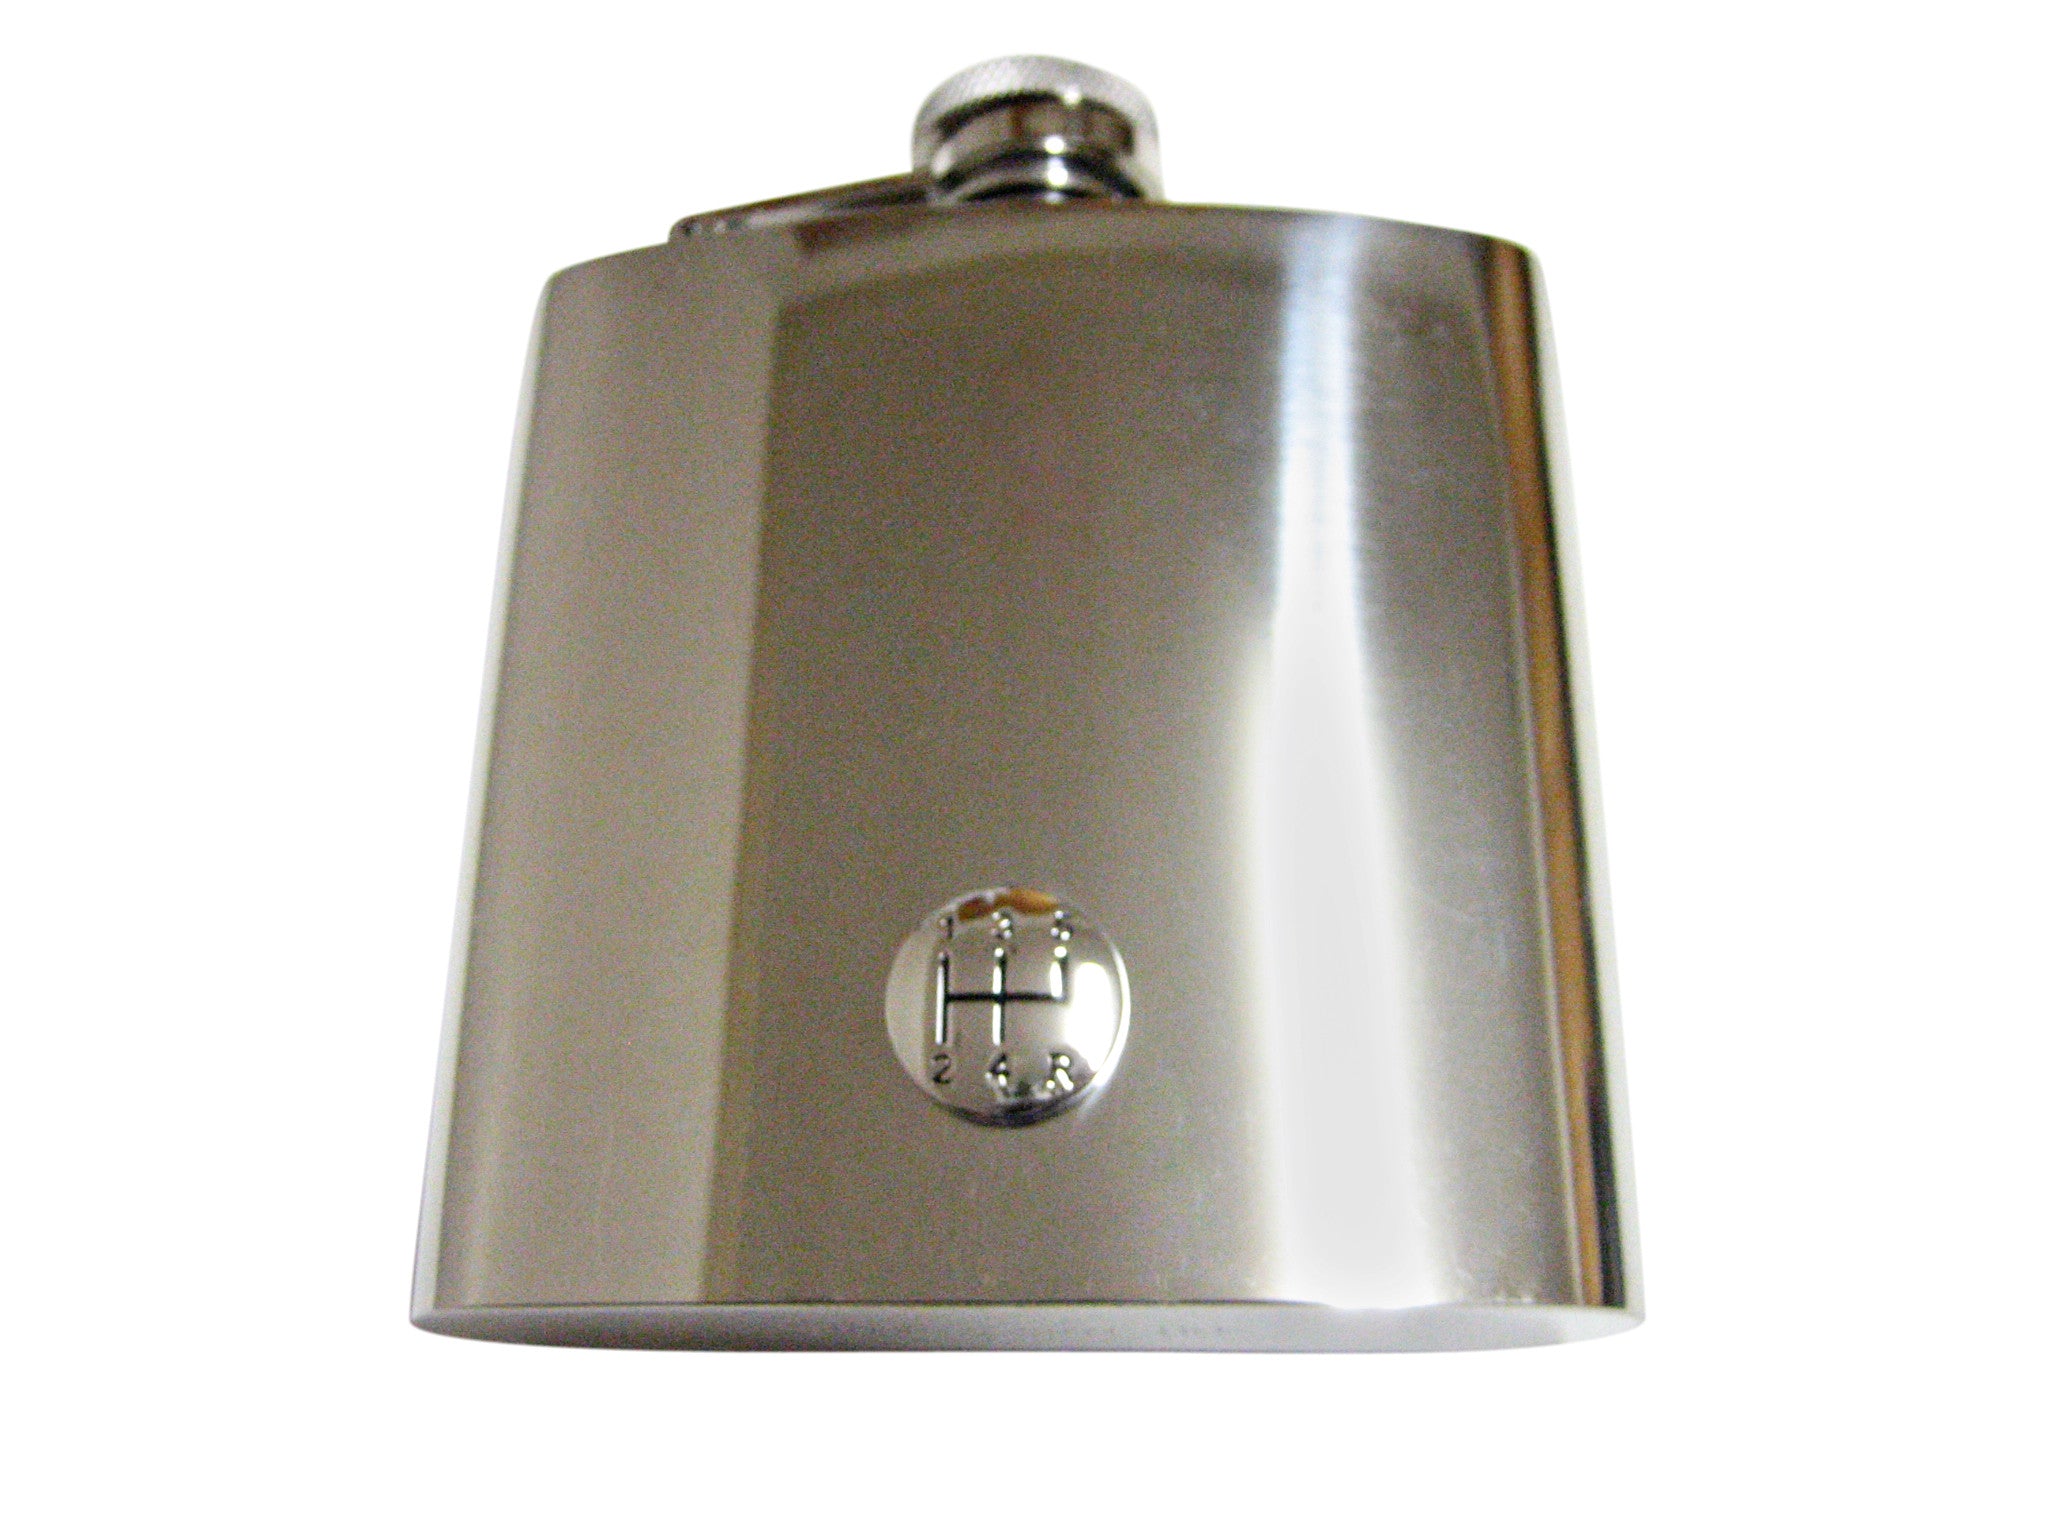 Shiny Gear Shift 6 Oz. Stainless Steel Flask